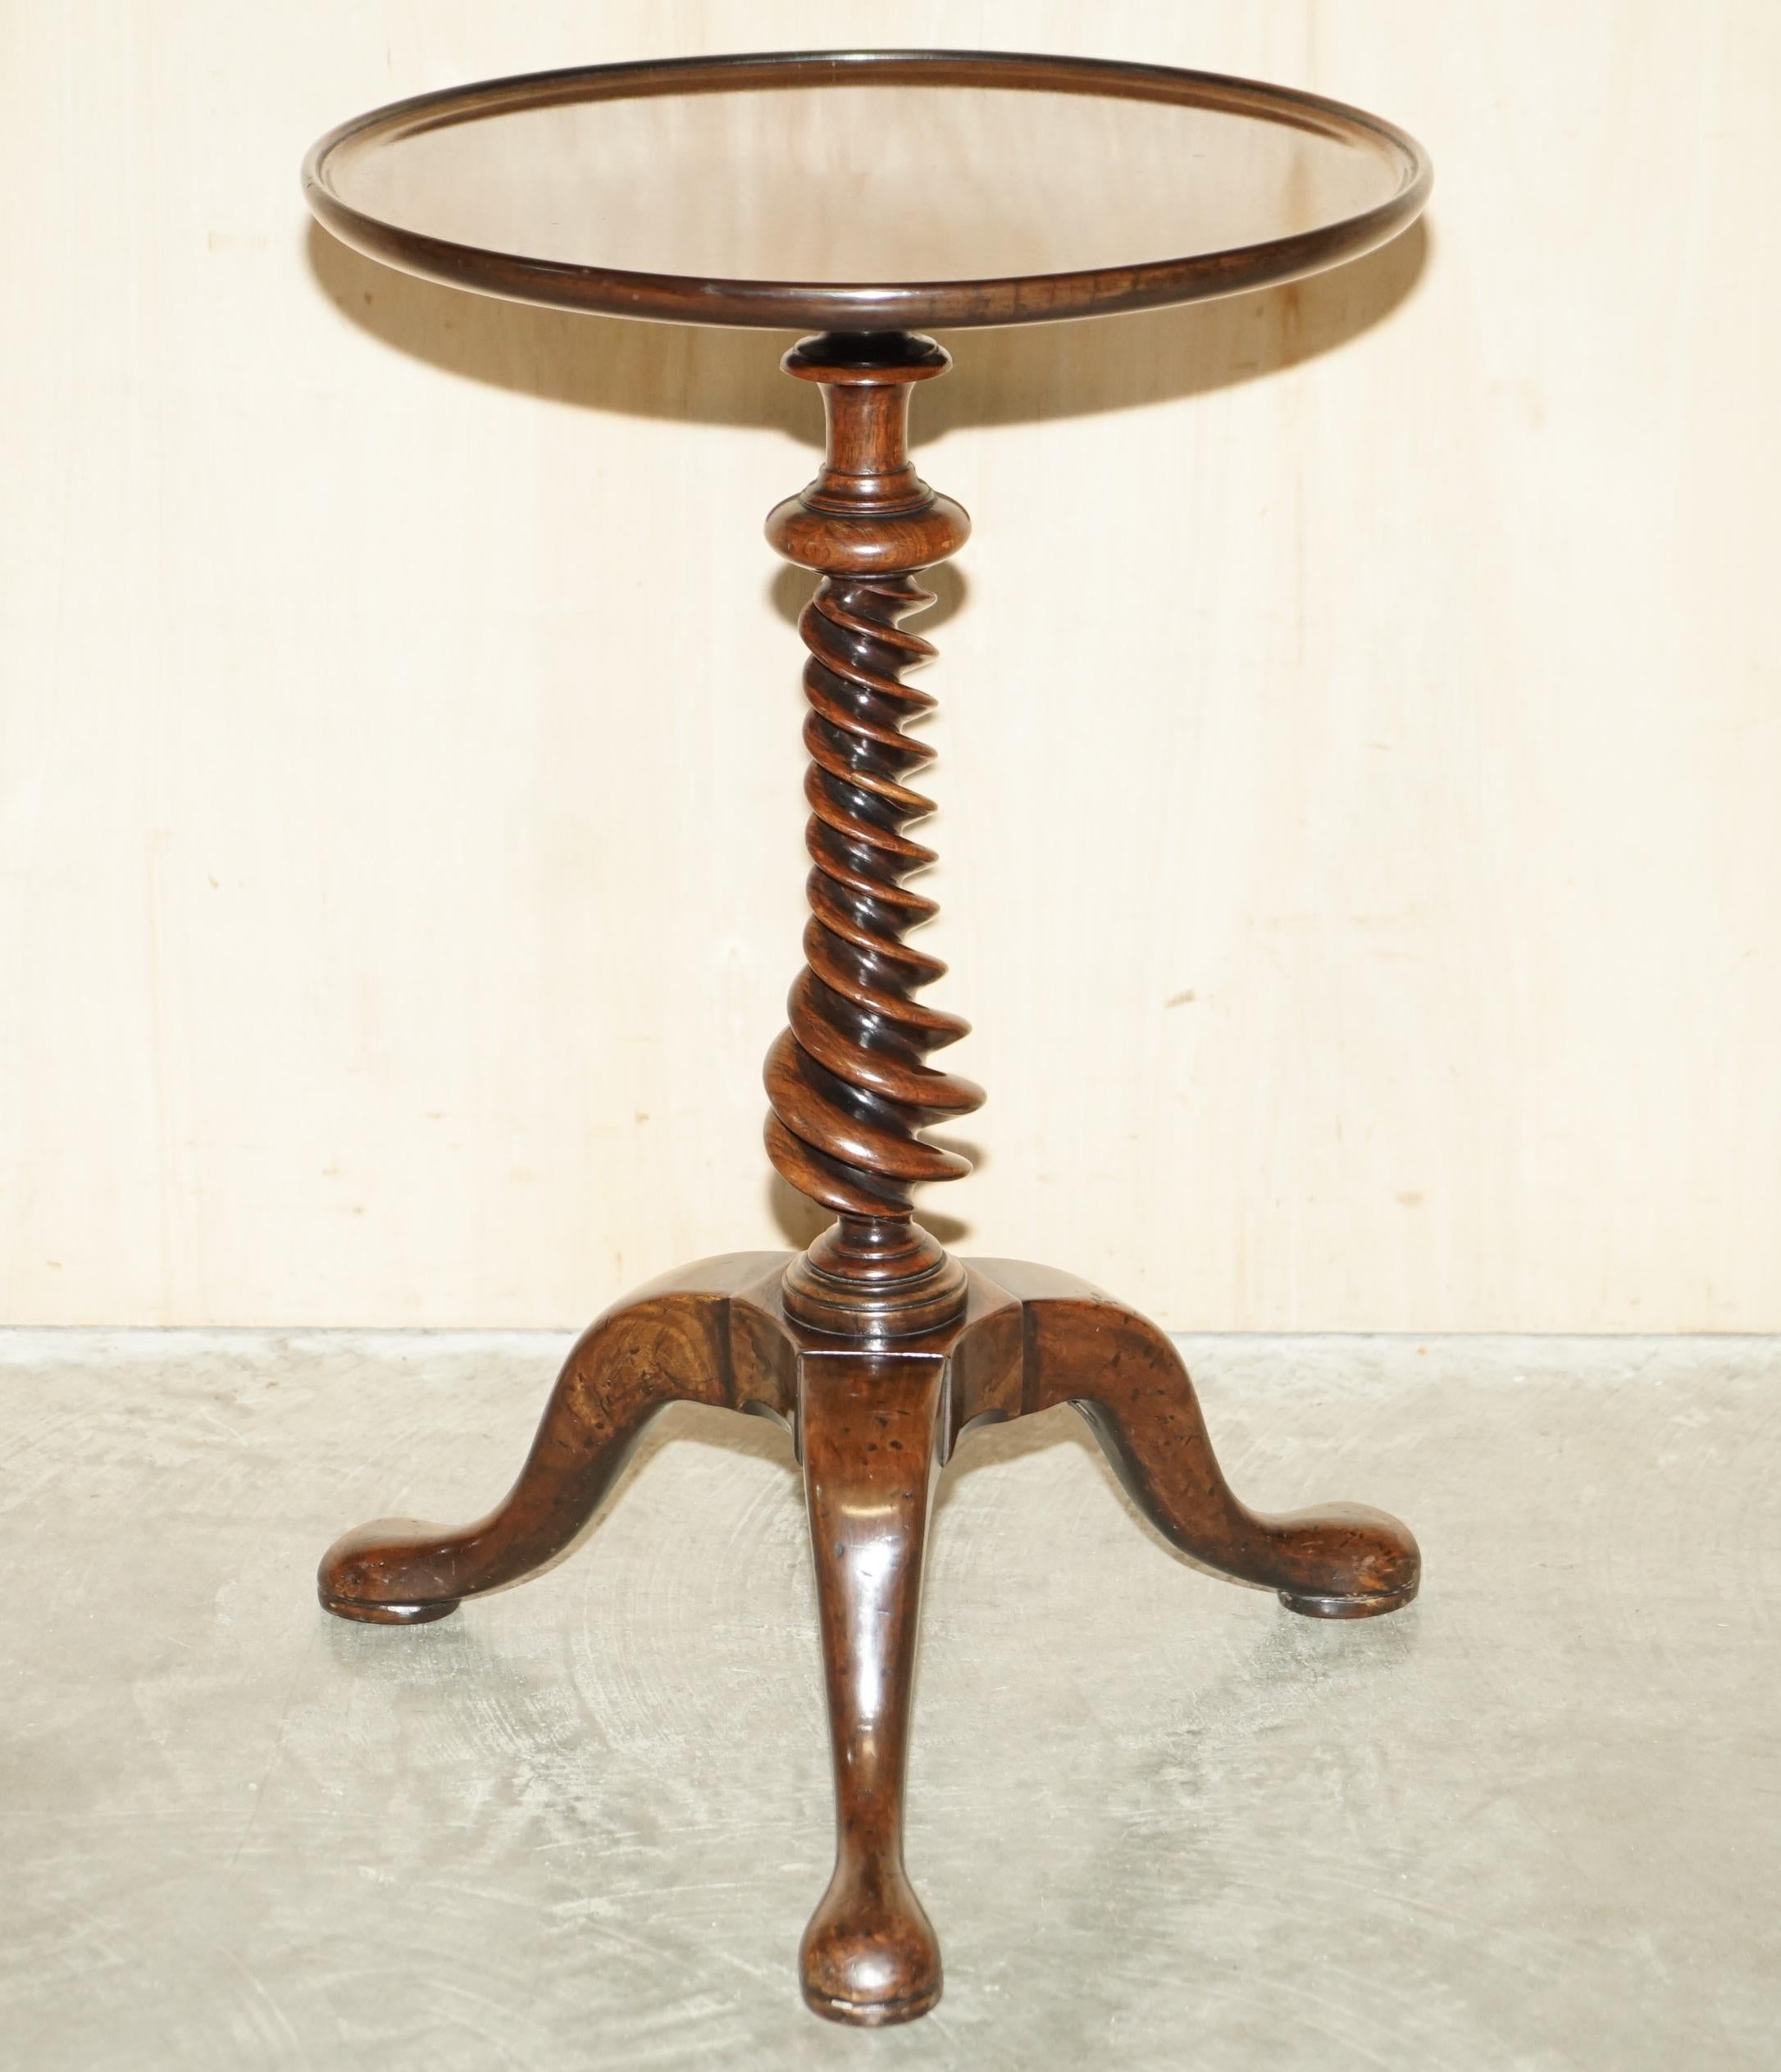 We are delighted to offer for sale this absolutely exquisite rich Rosewood George III circa 1800-1820 side table with spiral column base.

One of the best looking tables I have ever seen in my life, the spiral base is exquisite, it really is a